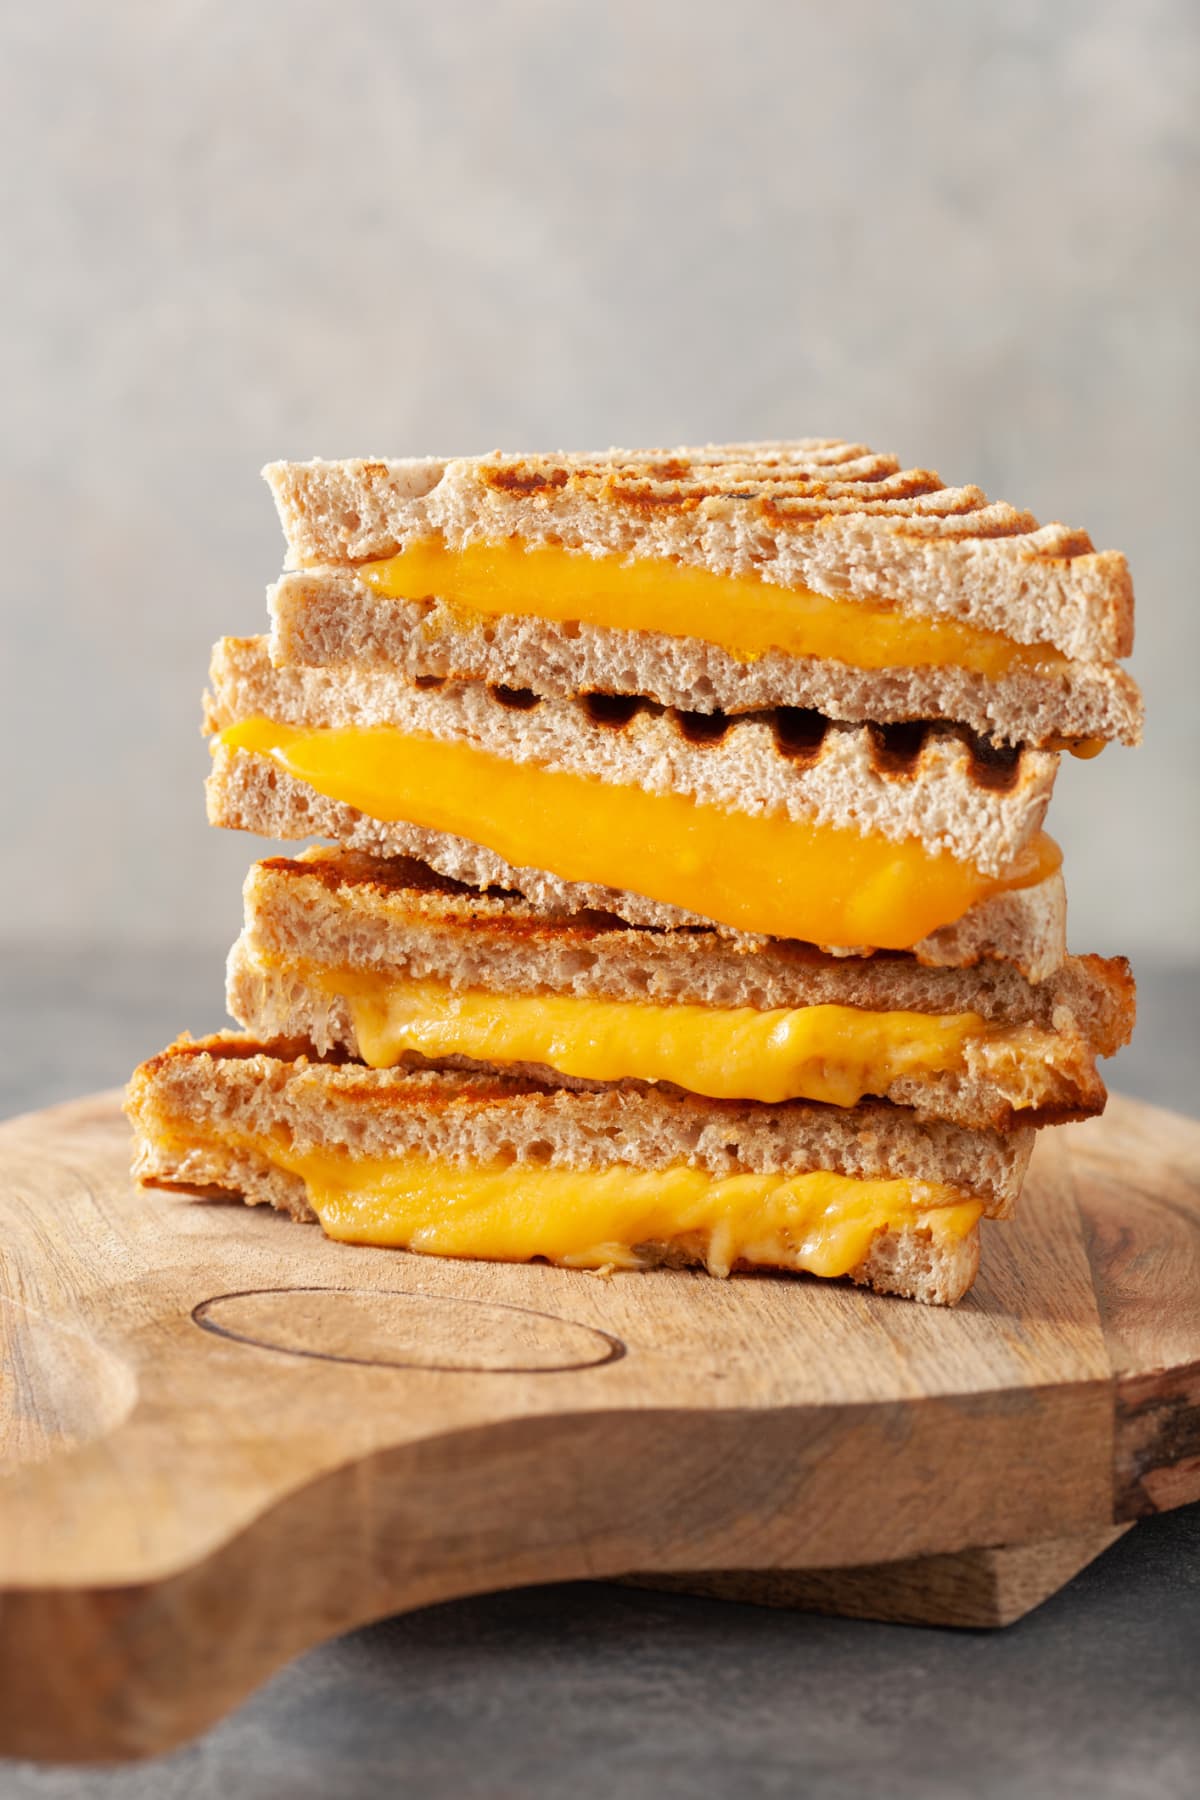 Halved grilled cheese sandwiches on a wooden surface